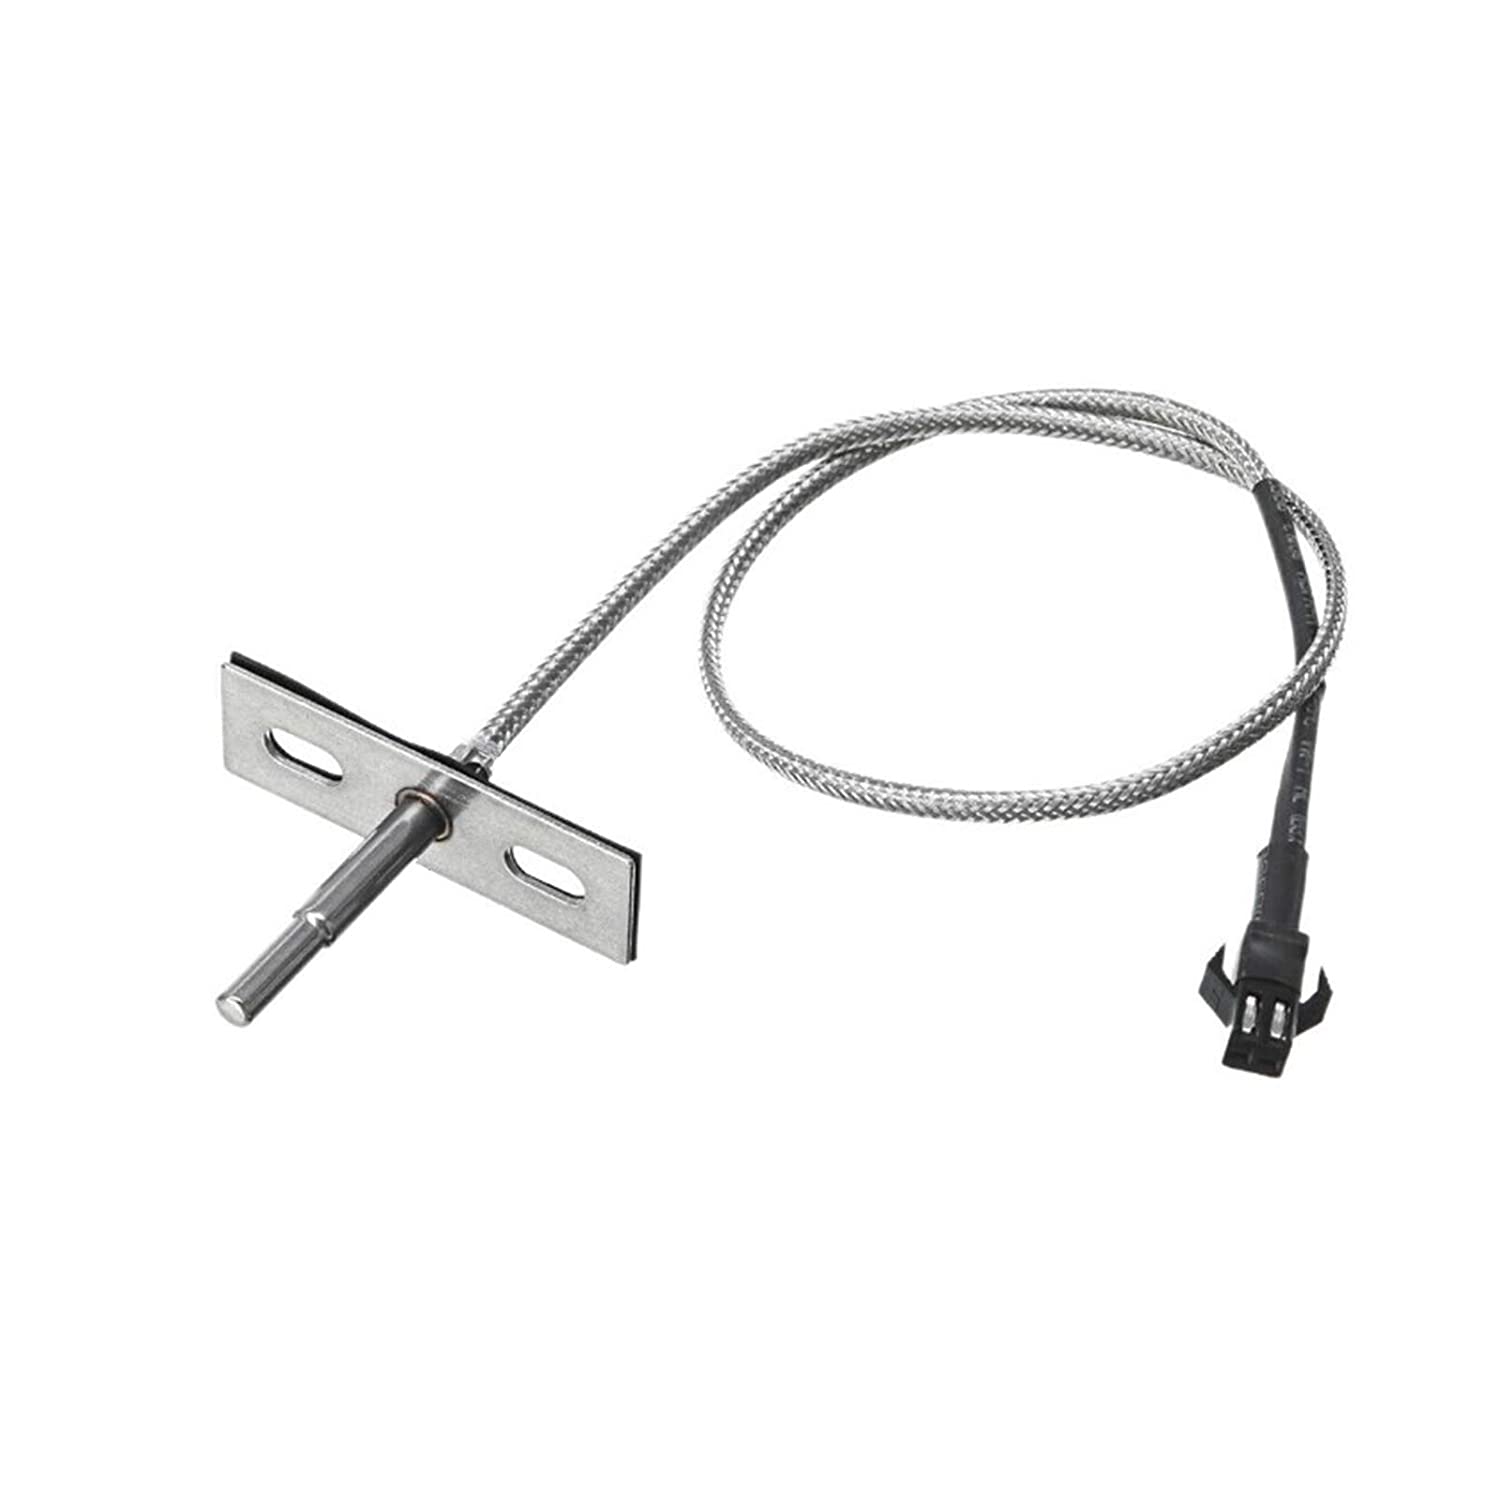 Part PBV357P1-36, RTD Temperature Sensor for Pit Boss Vertical Smoker-YAOAWE